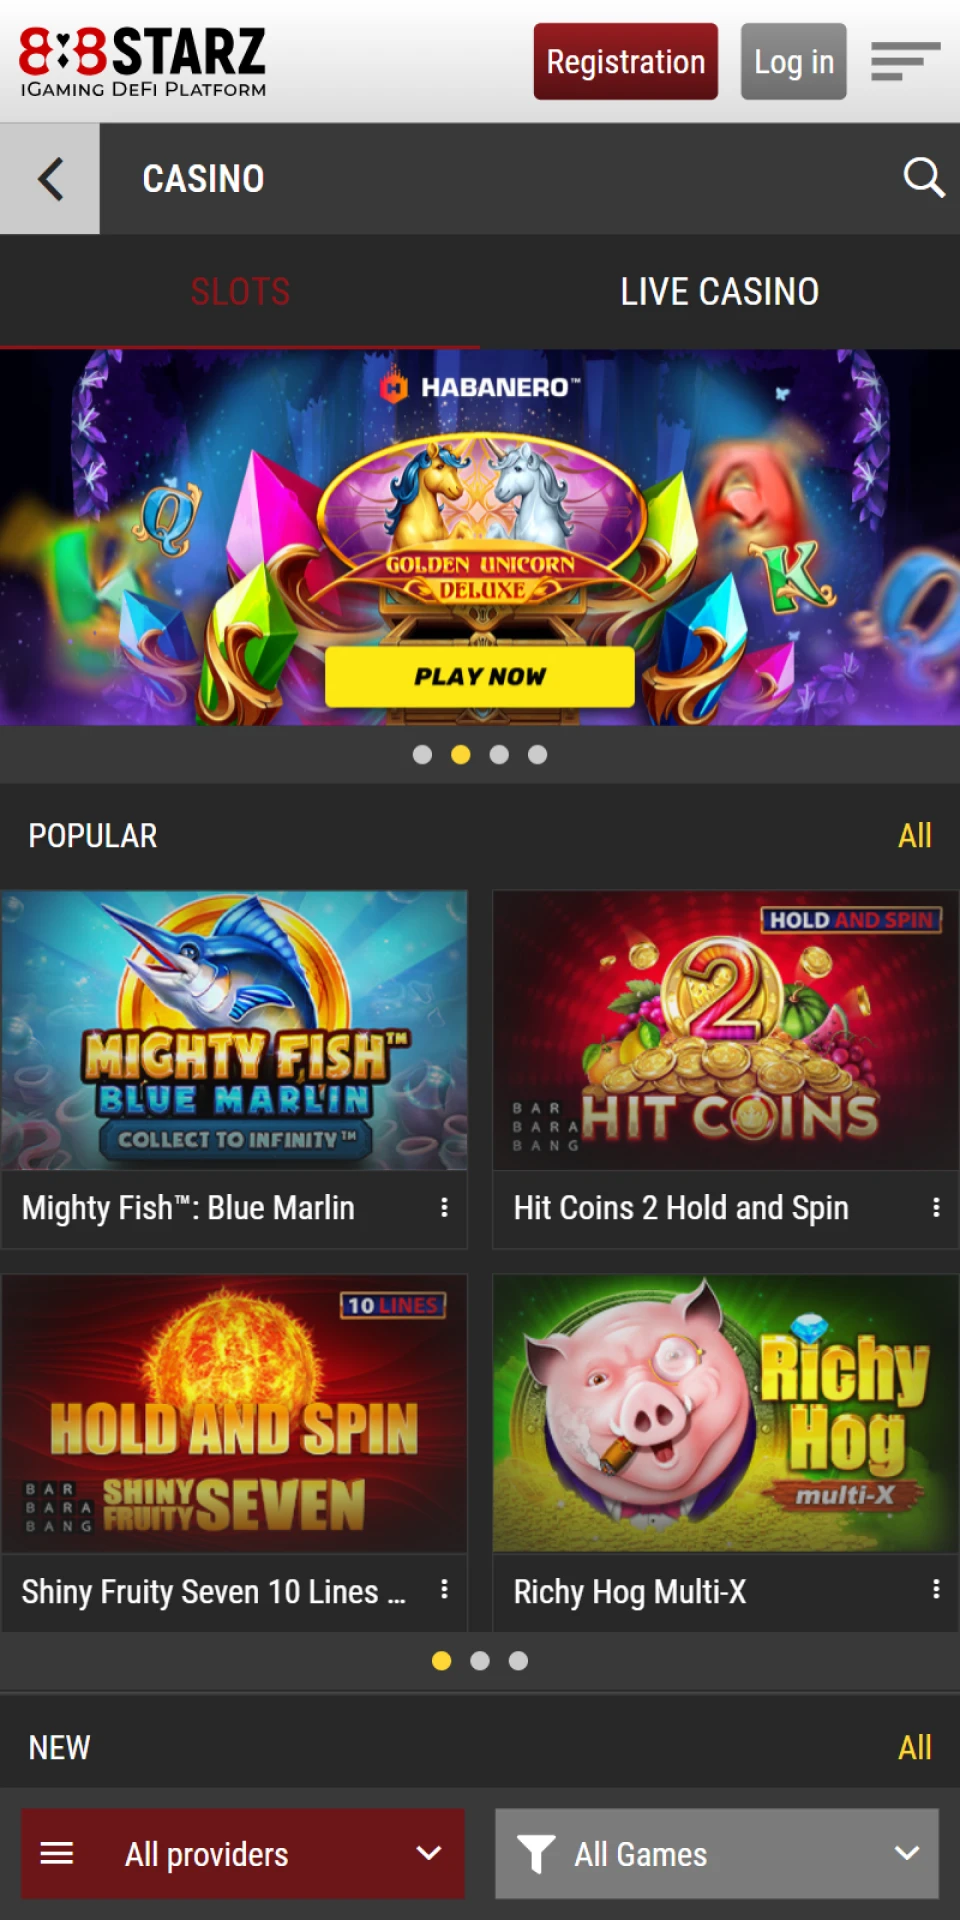 Play casino games on the 888Starz mobile app.